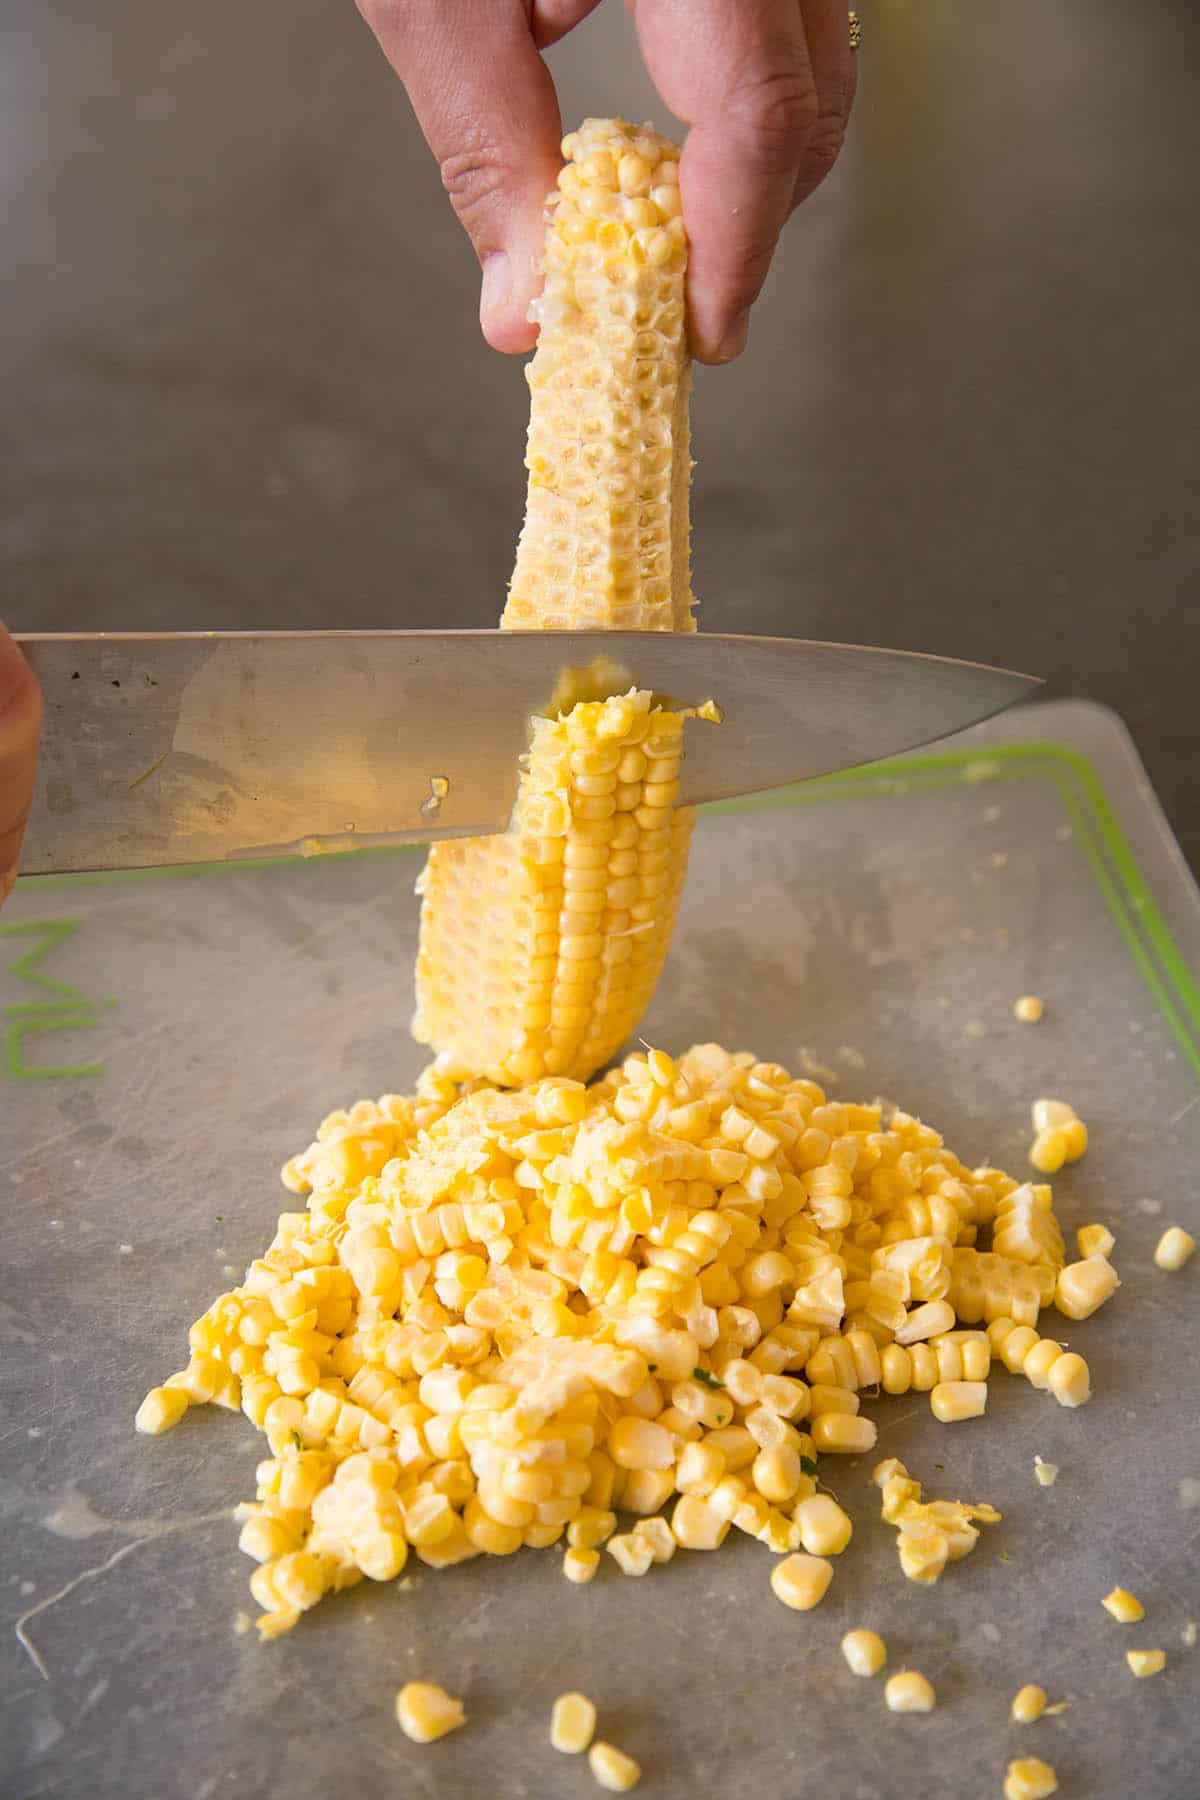 Slicing the Kernels from the Corn Cob